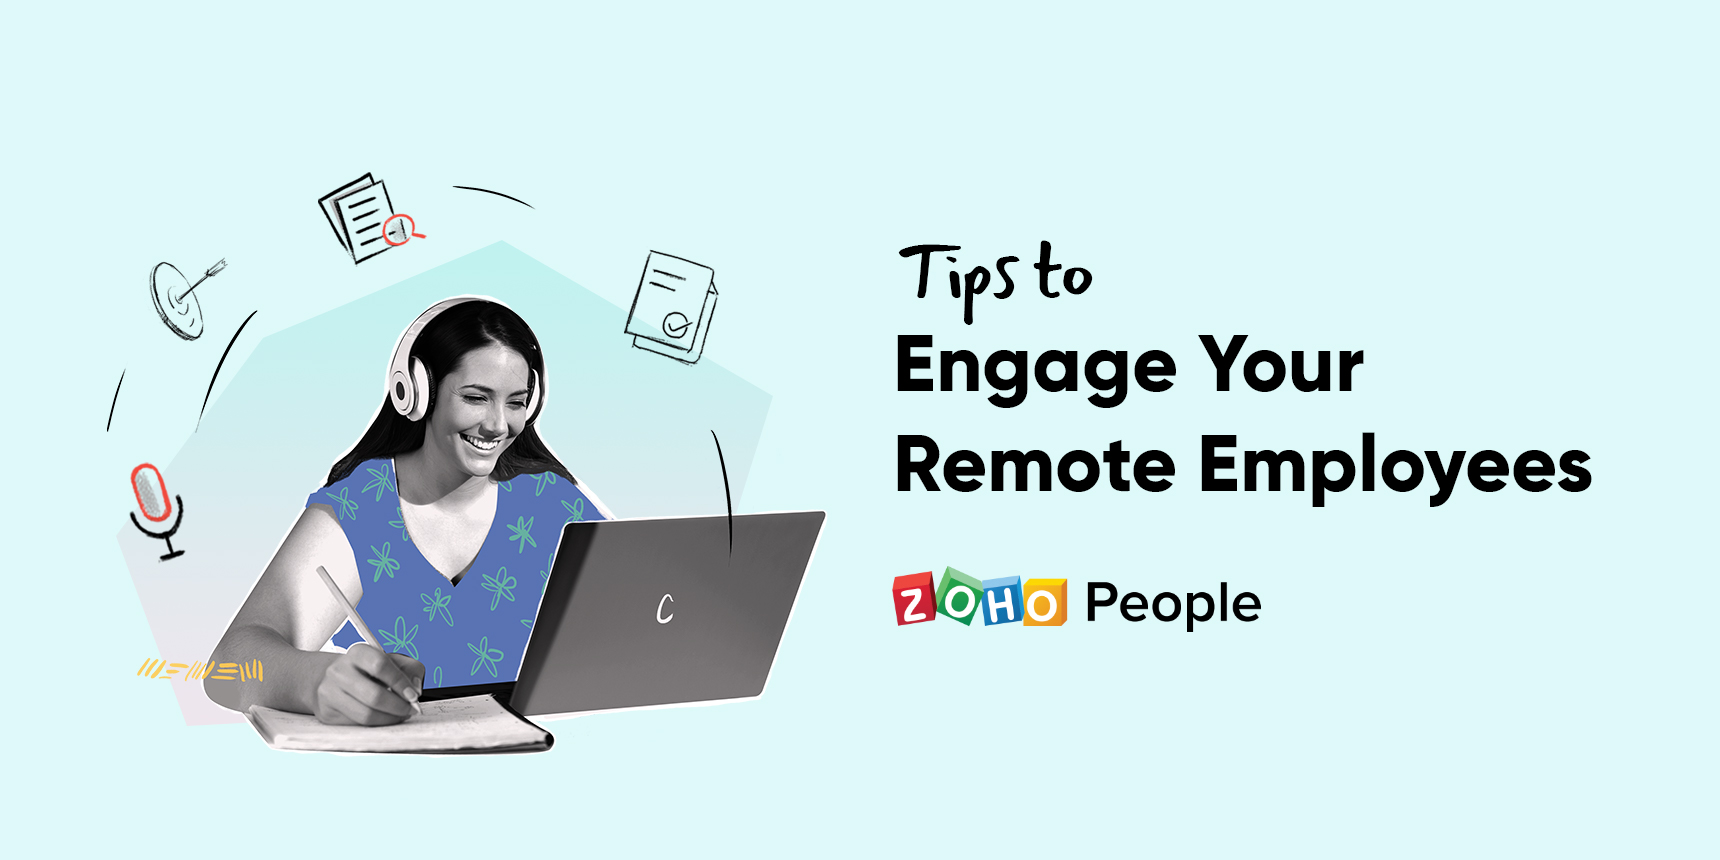 Engage your remote workforce with these 6 tips